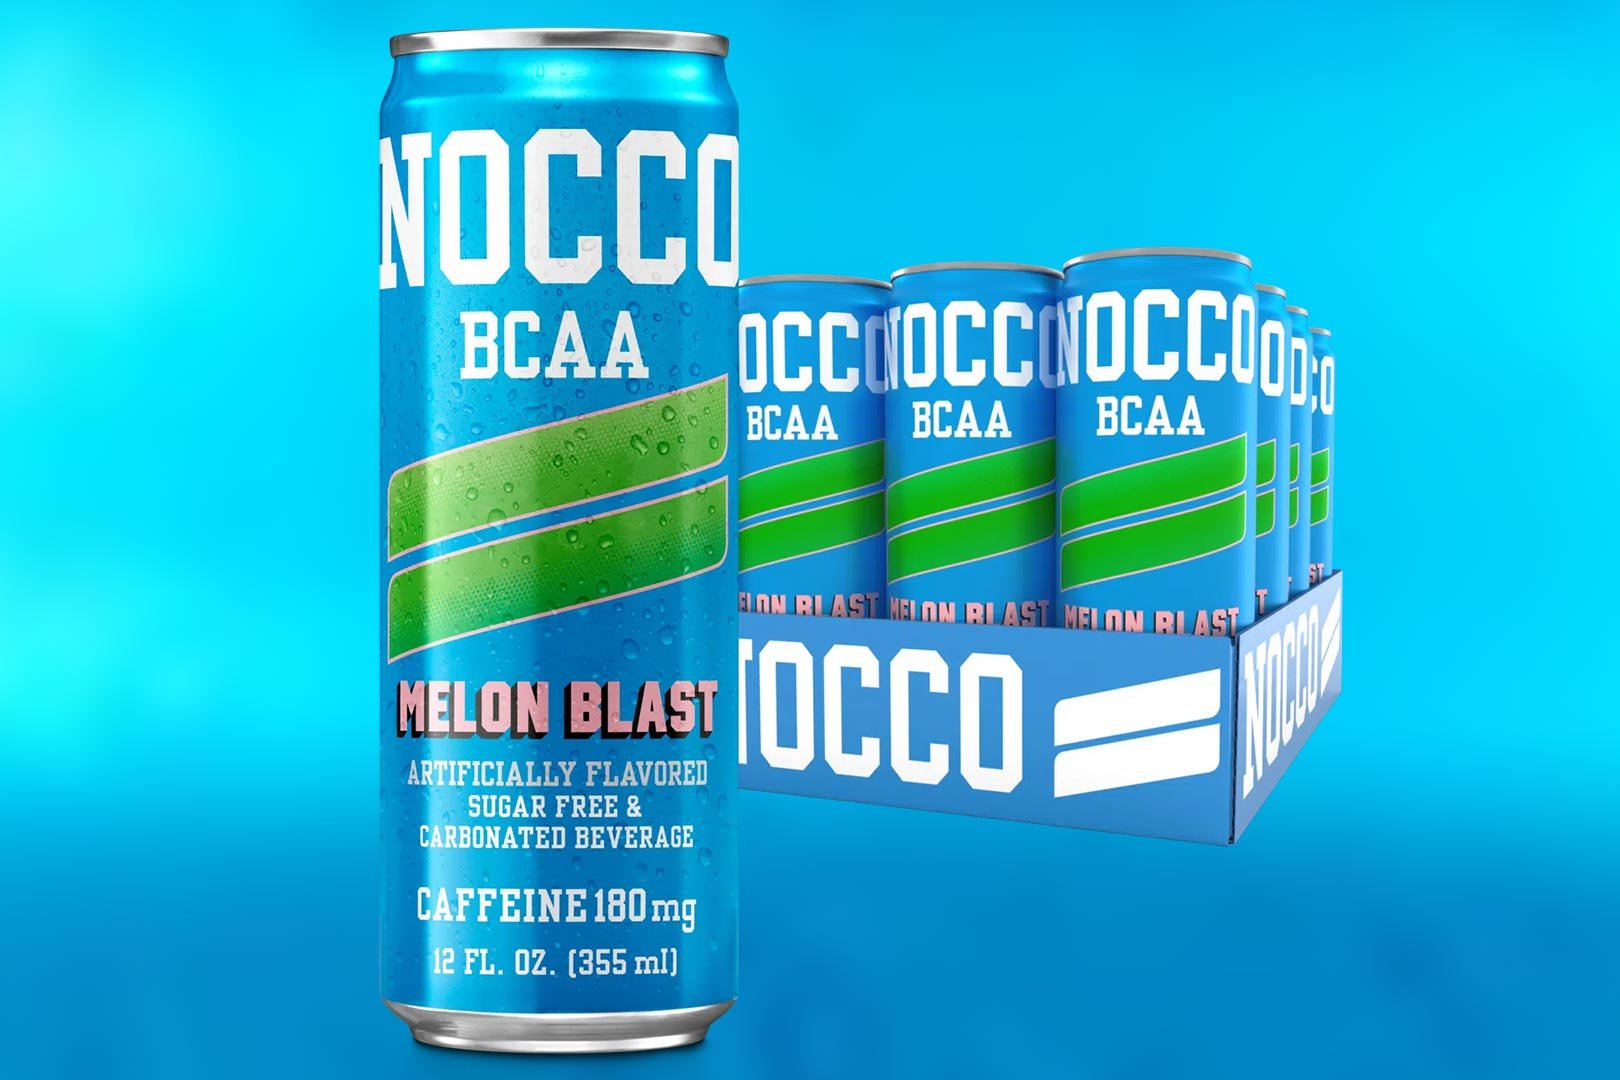 Melon Blast Nocco Energy Drink In The Us